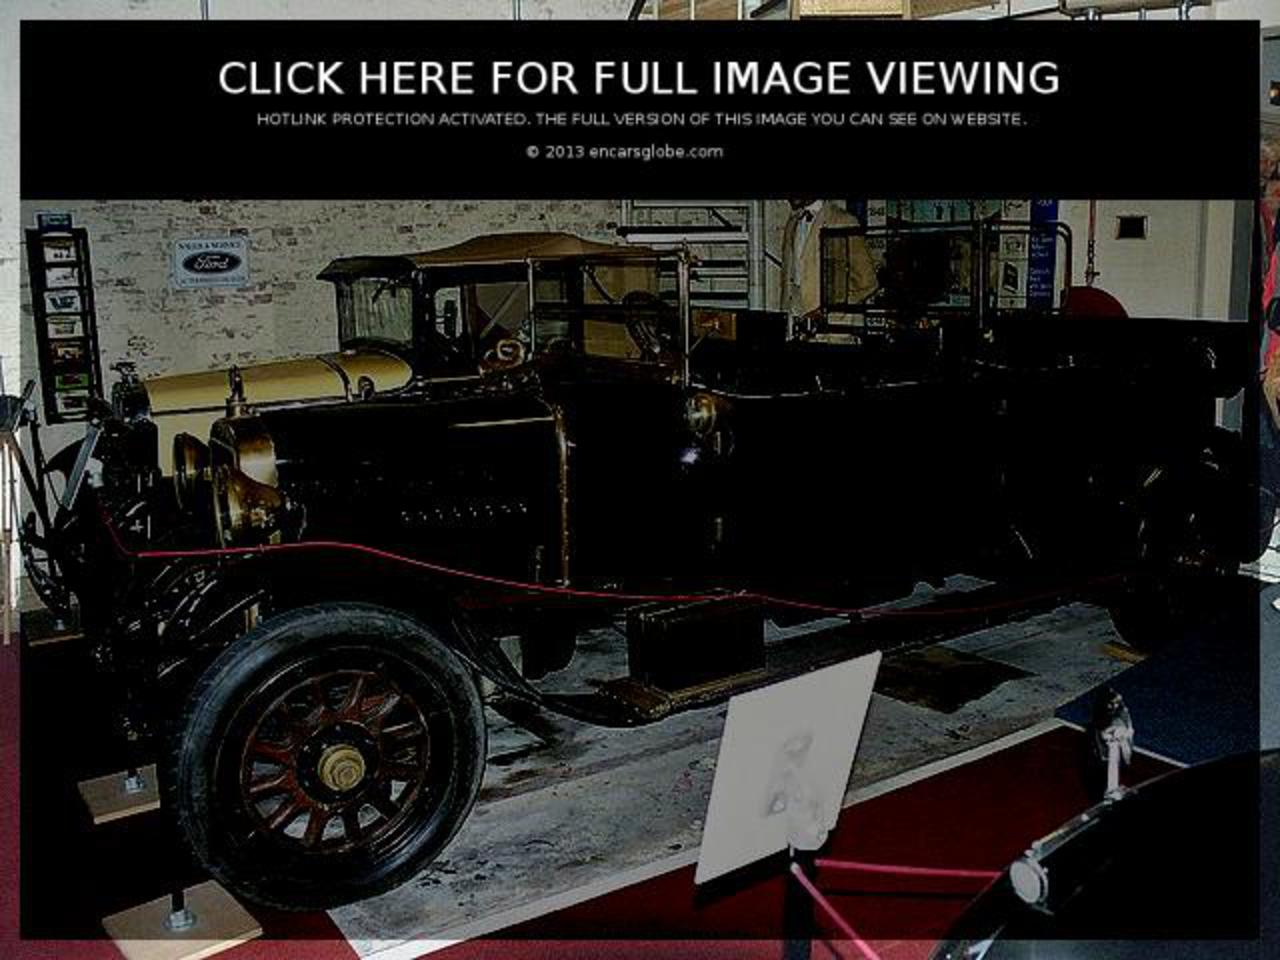 Sunbeam 12/16 hp Photo Gallery: Photo #07 out of 9, Image Size ...